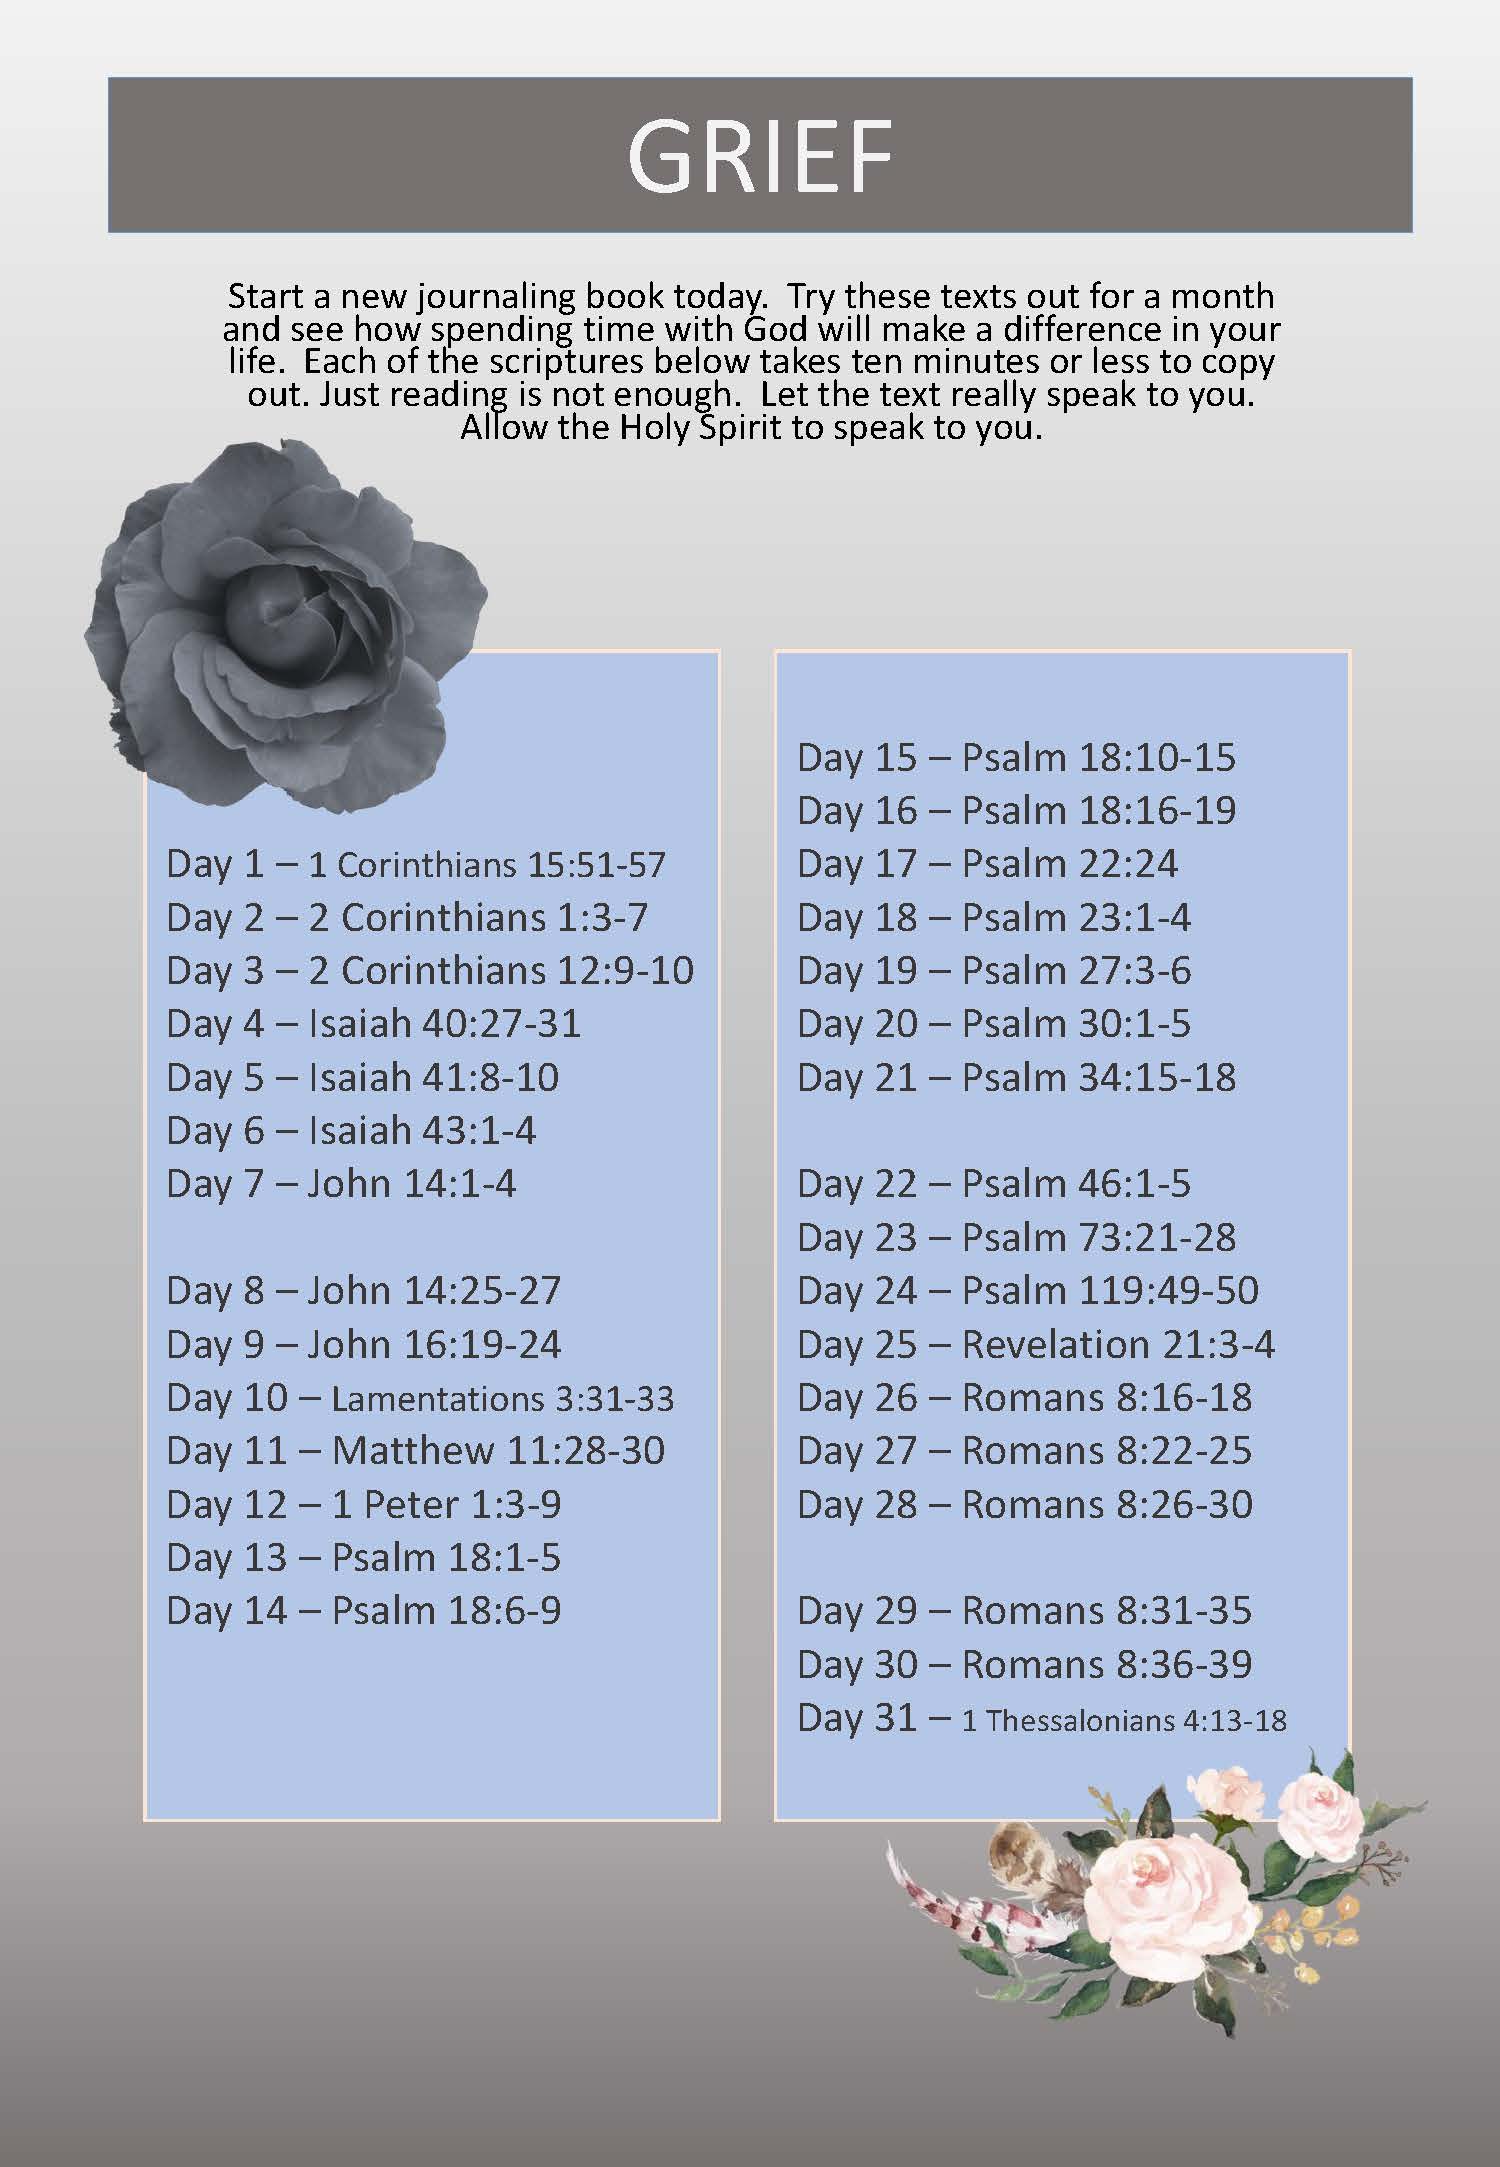 Scripture Writing plan GRIEF